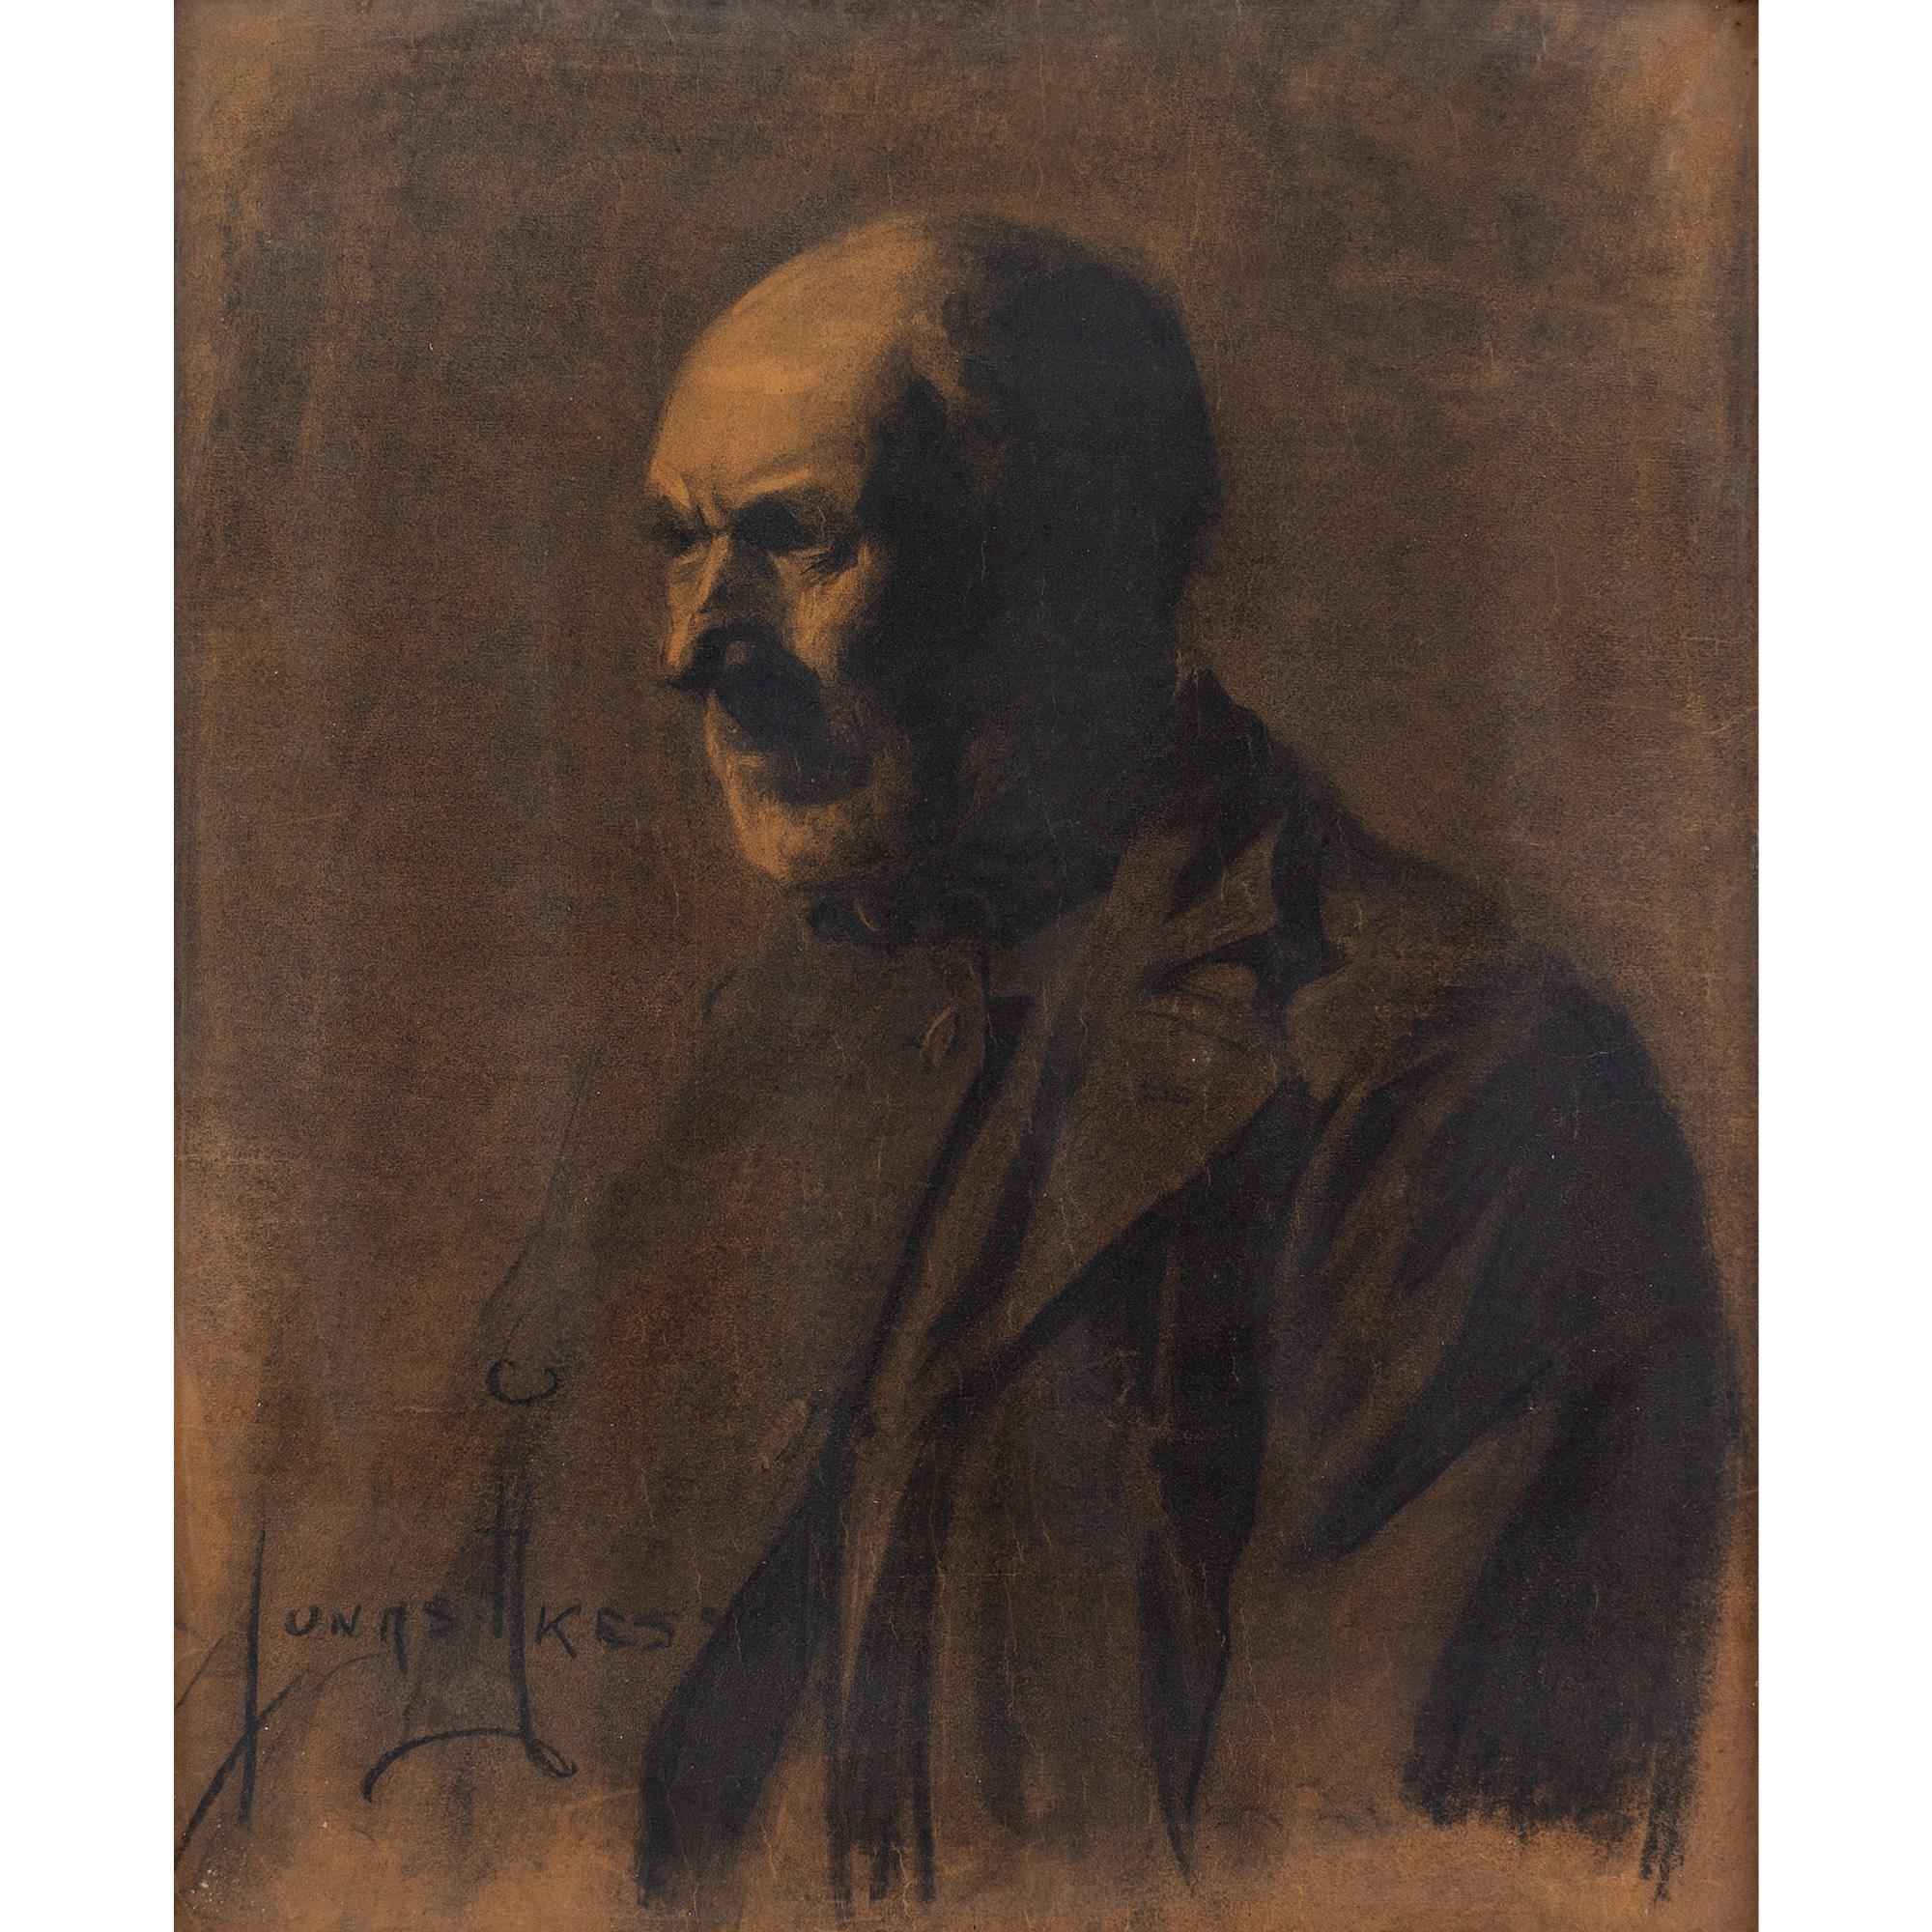 This enigmatic portrait of a man by Jonas Åkesson (1879-1979) is a masterclass in charcoal. Note the strong lines, which delineate the creases in his jacket, and continue beyond the filled areas. These were created with confidence, a series of